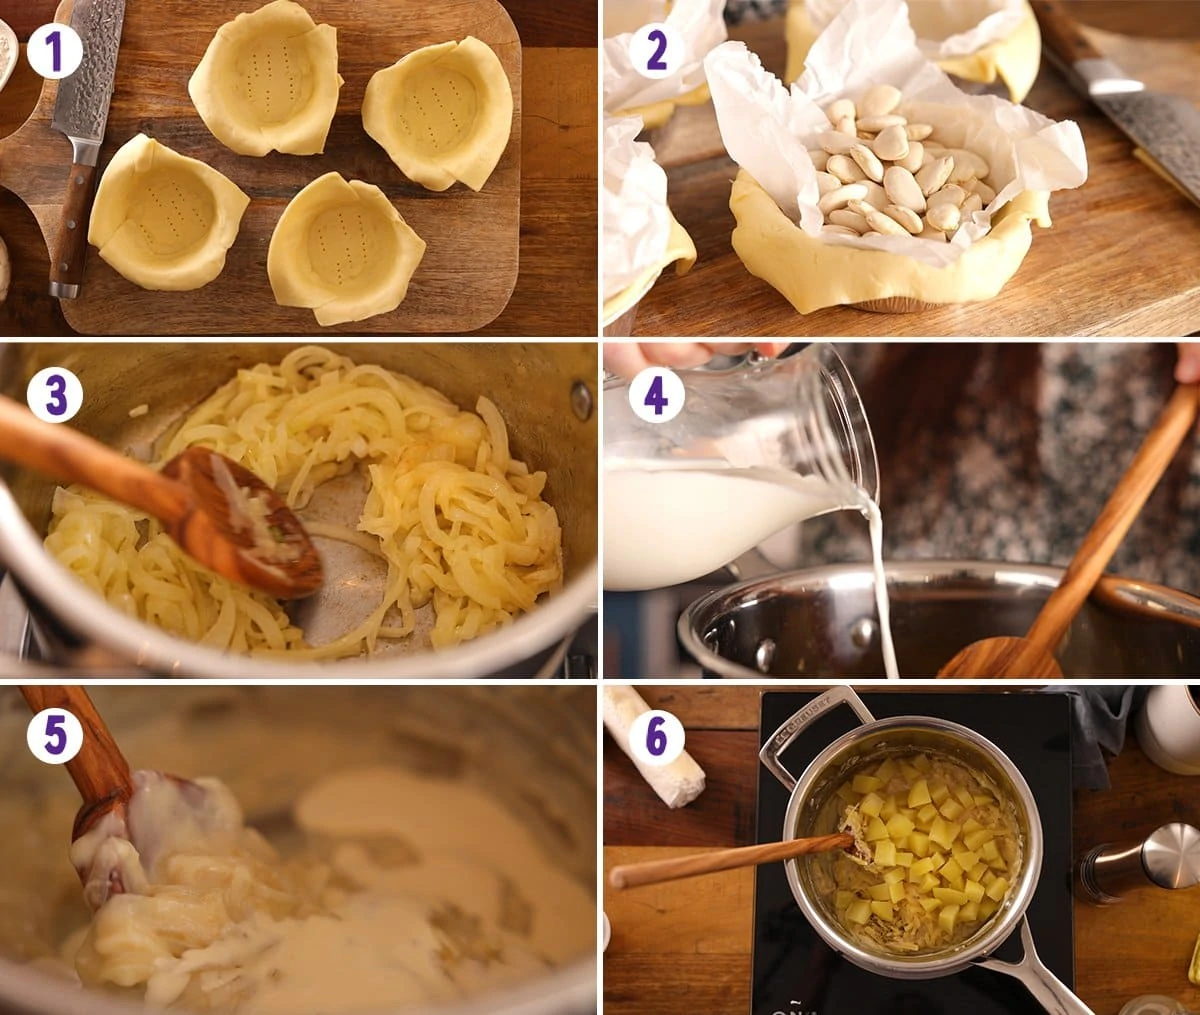 6 image collage showing initial process steps for making individual cheese and onion pies.